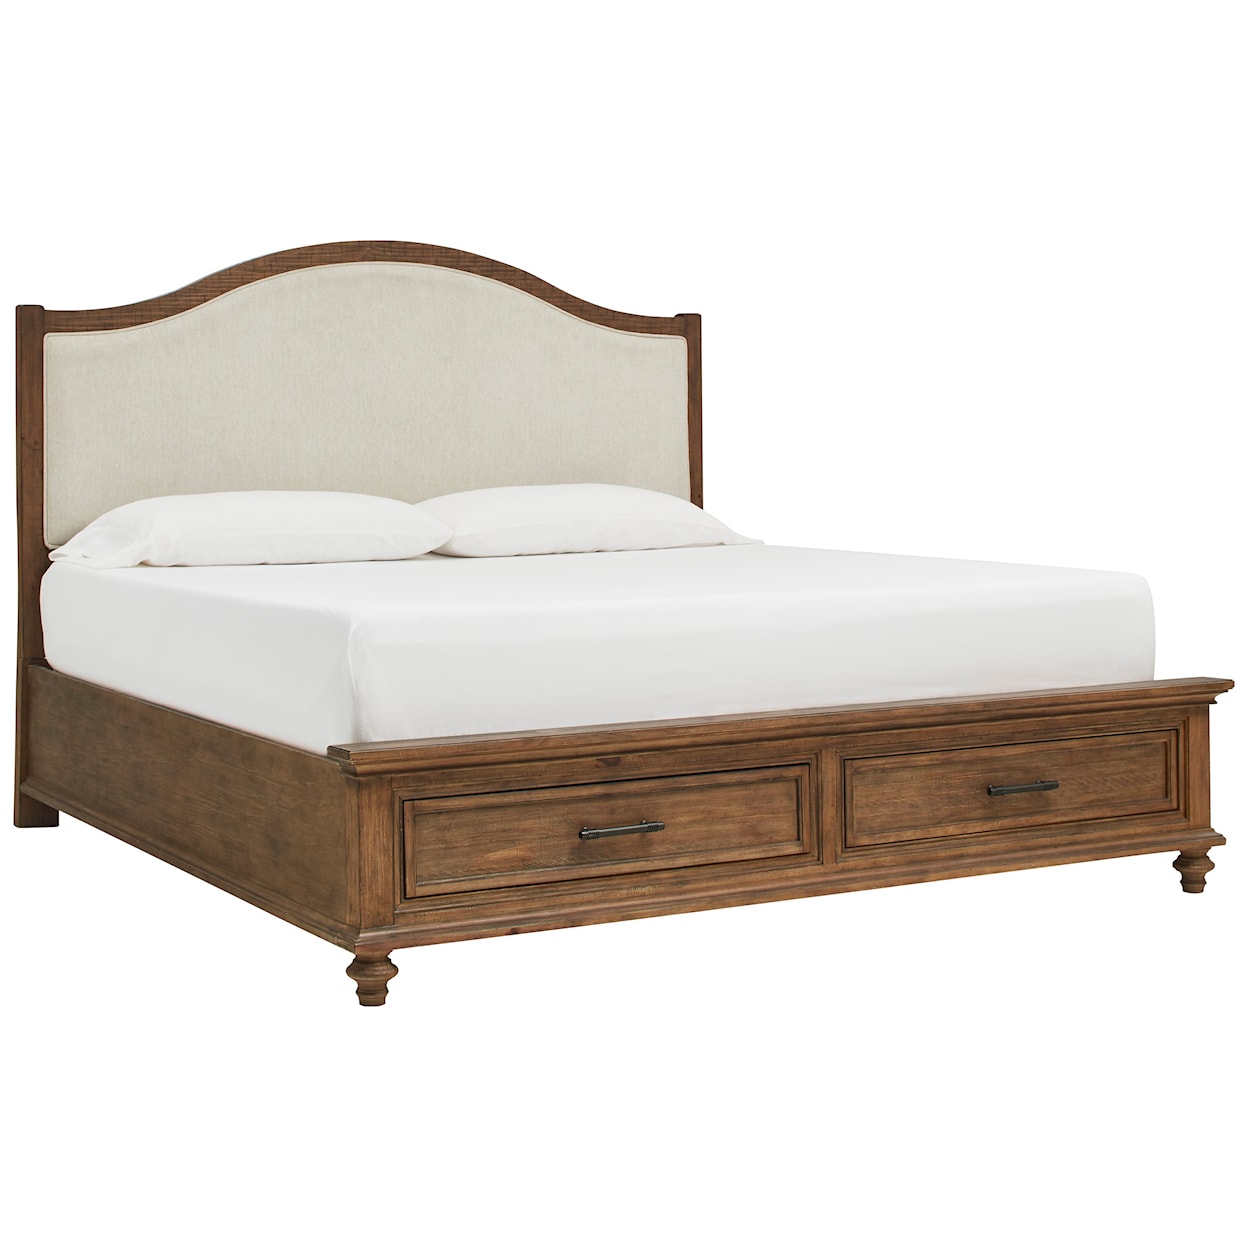 Aspenhome Hensley California King Arched Panel Bed